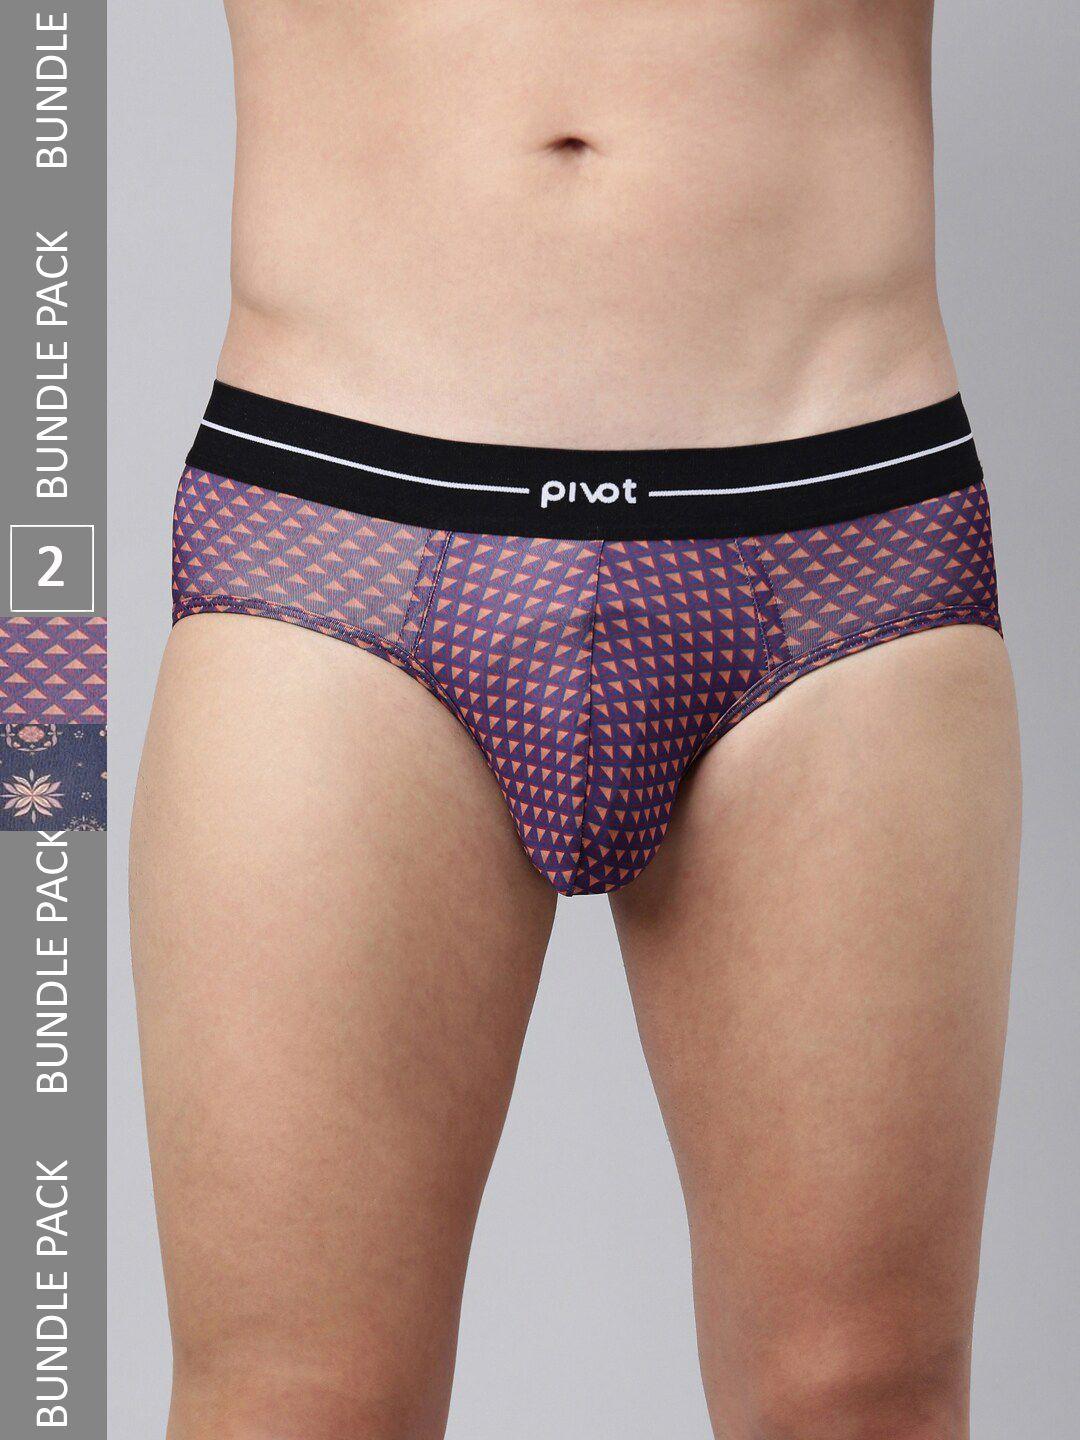 pivot Men Pack Of 2 Mid-Rise Assorted Basic Briefs